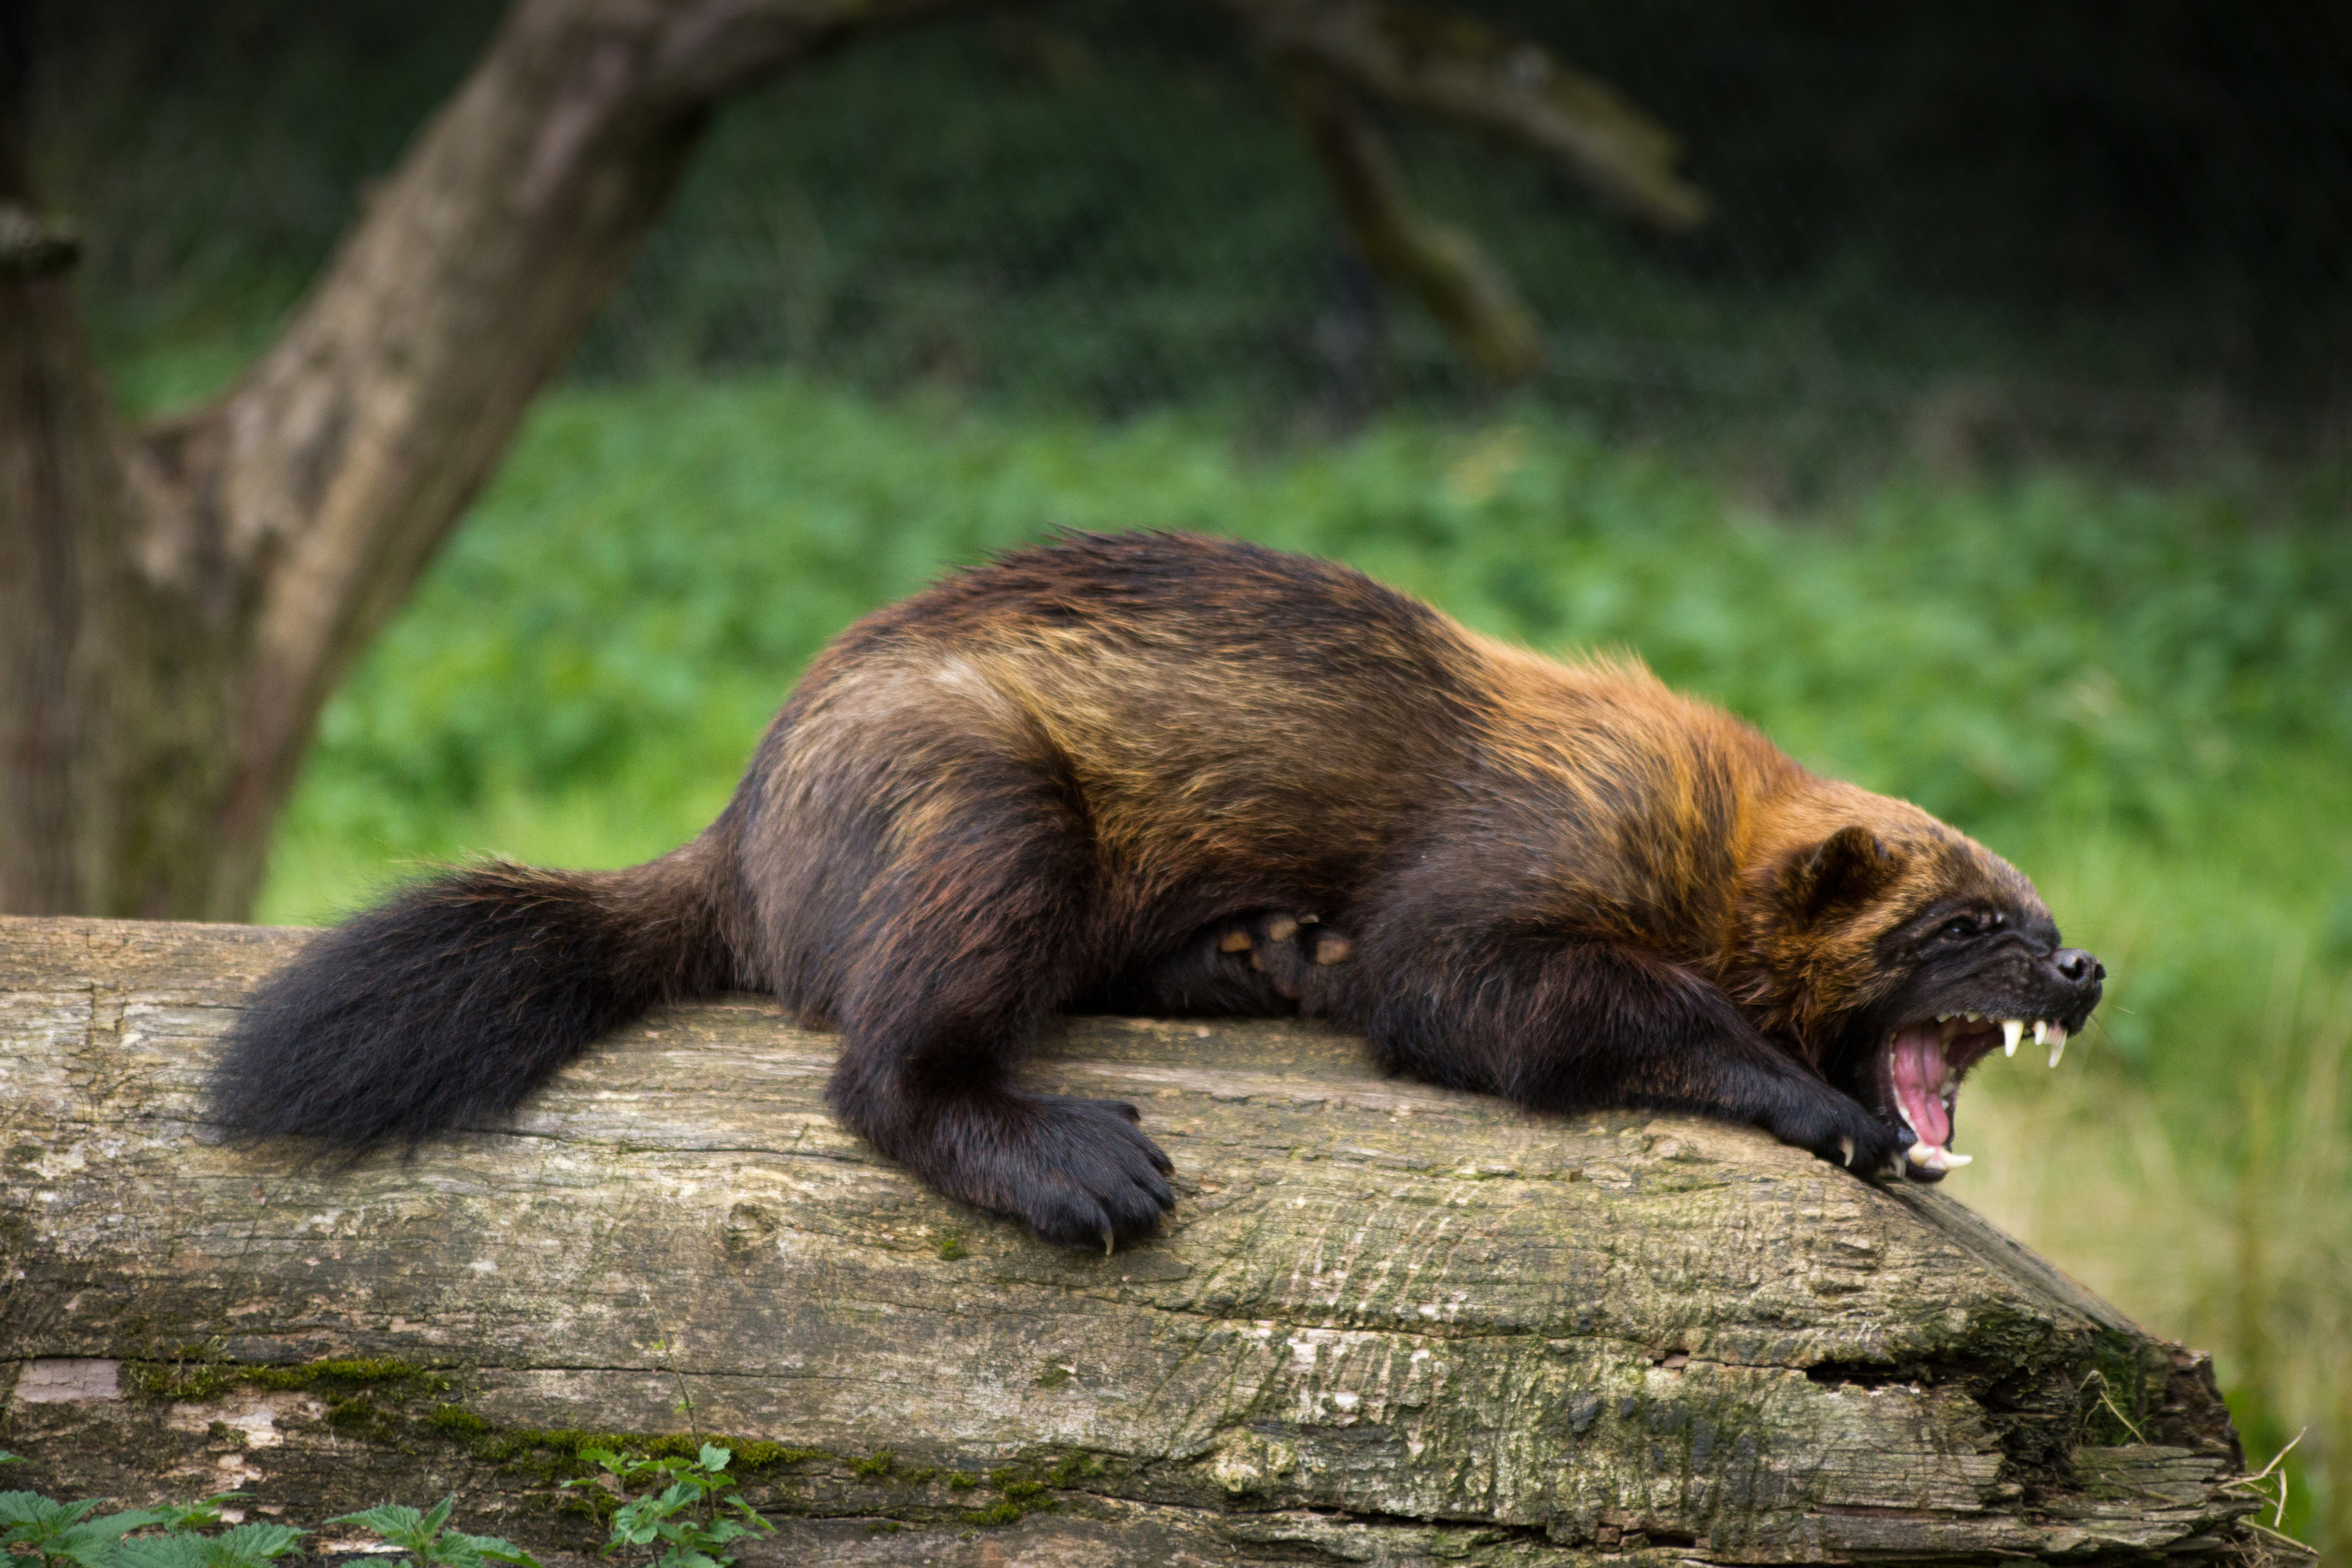 Wolverines are solitary animals